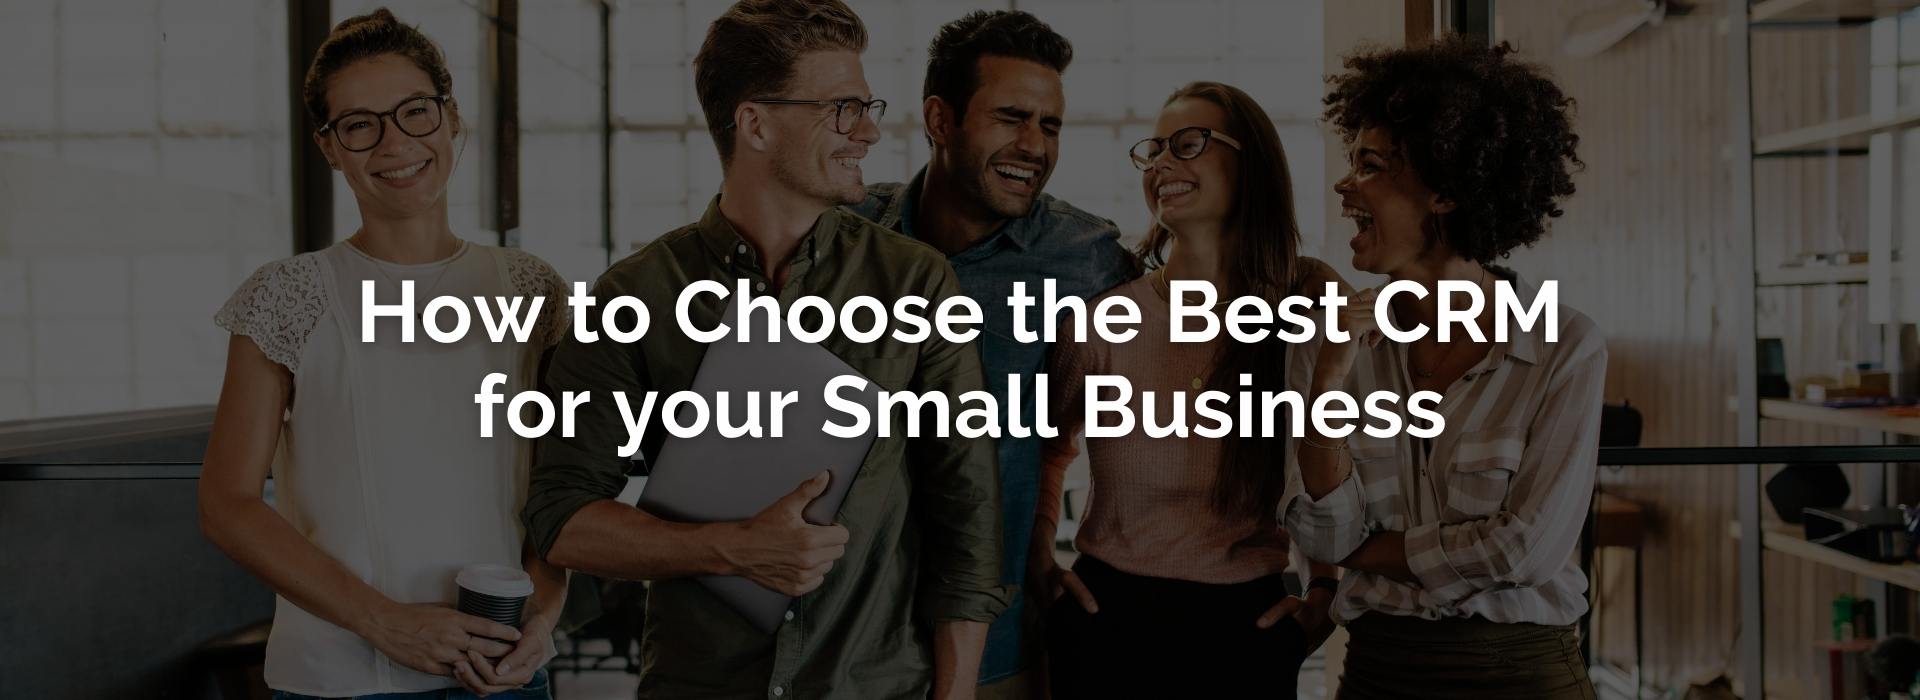 CHOOSING THE BEST CRM SOFTWARE FOR YOUR SMALL BUSINESS